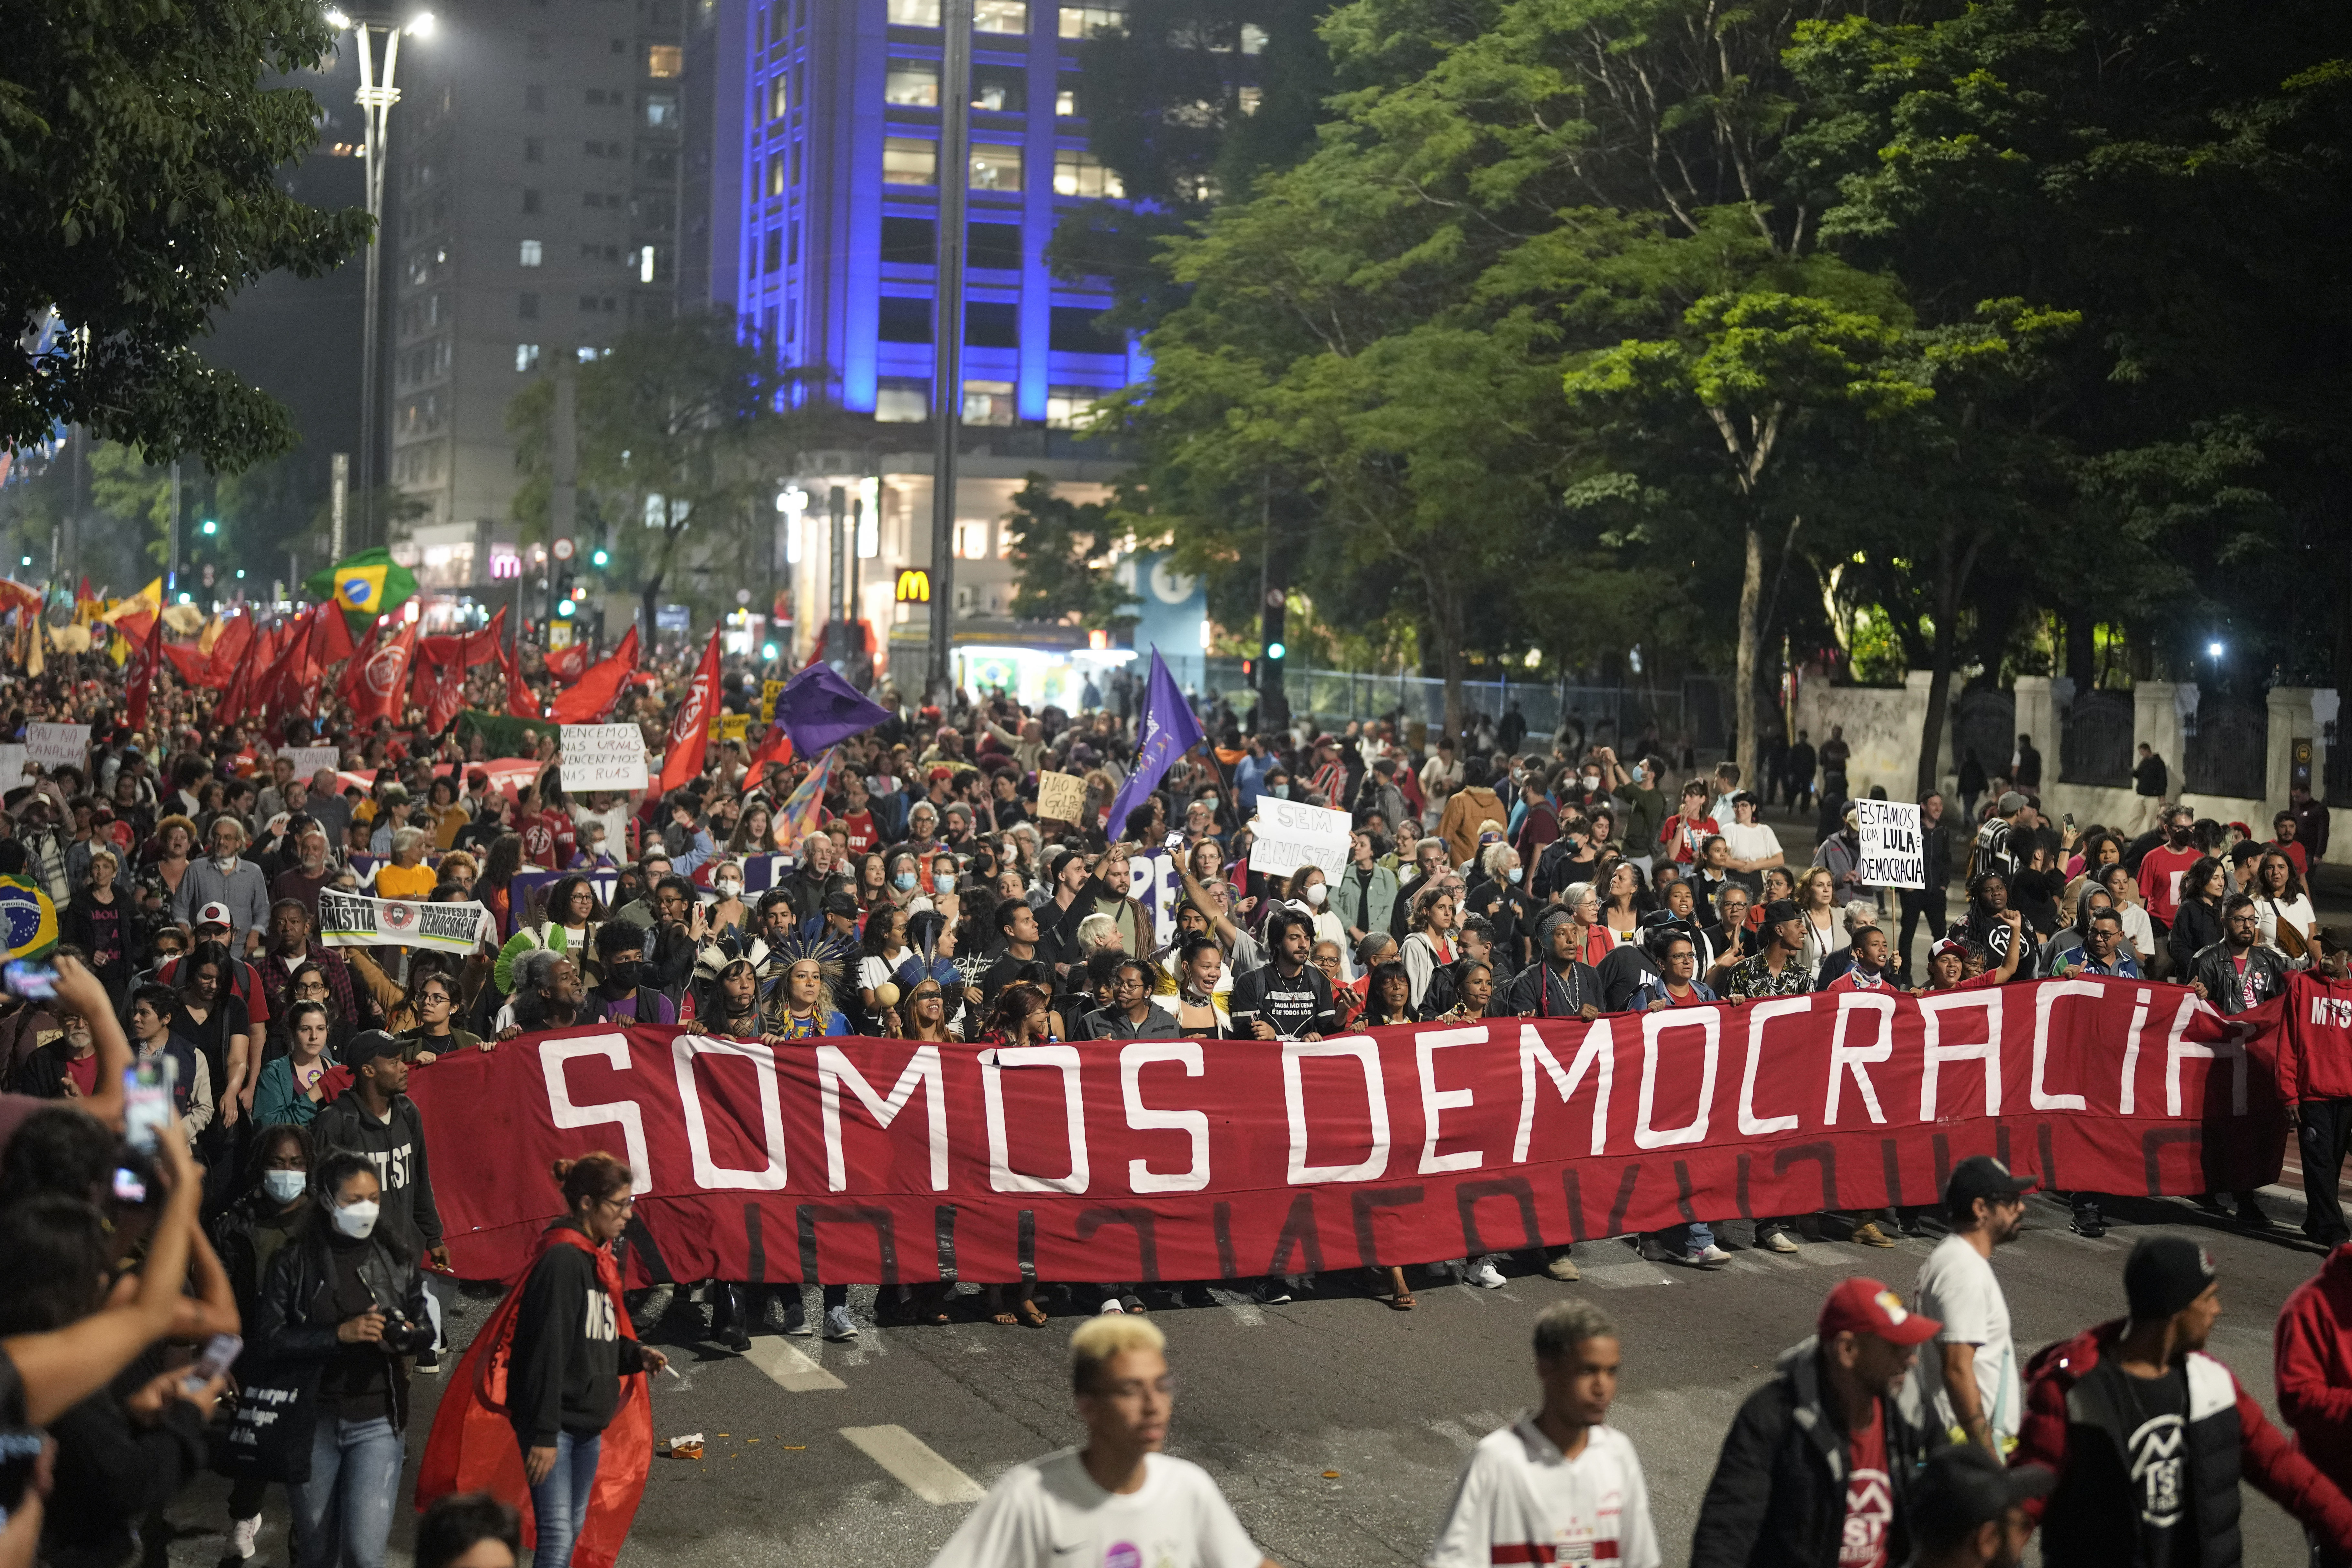 Demonstrators march holding a banner that reads in Portuguese "We are Democracy"